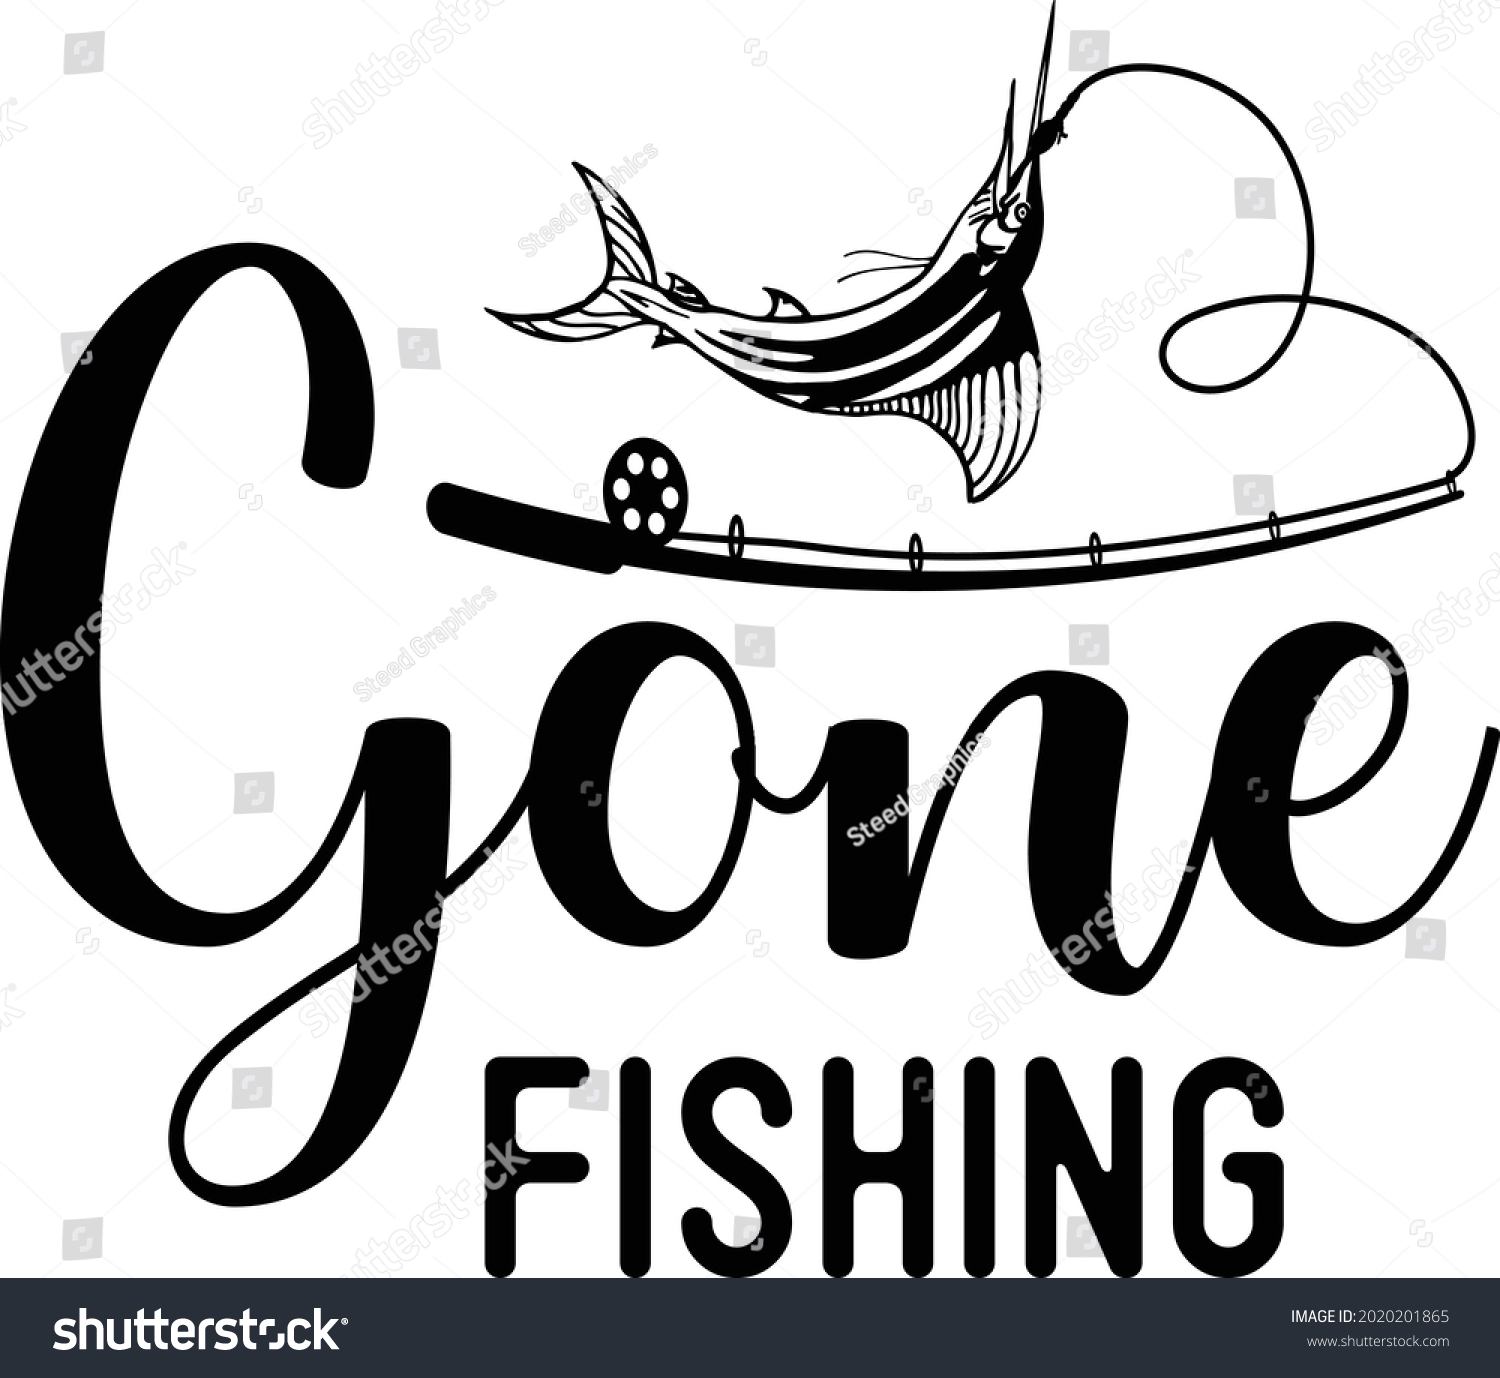 SVG of creative and unique fishing svg design svg